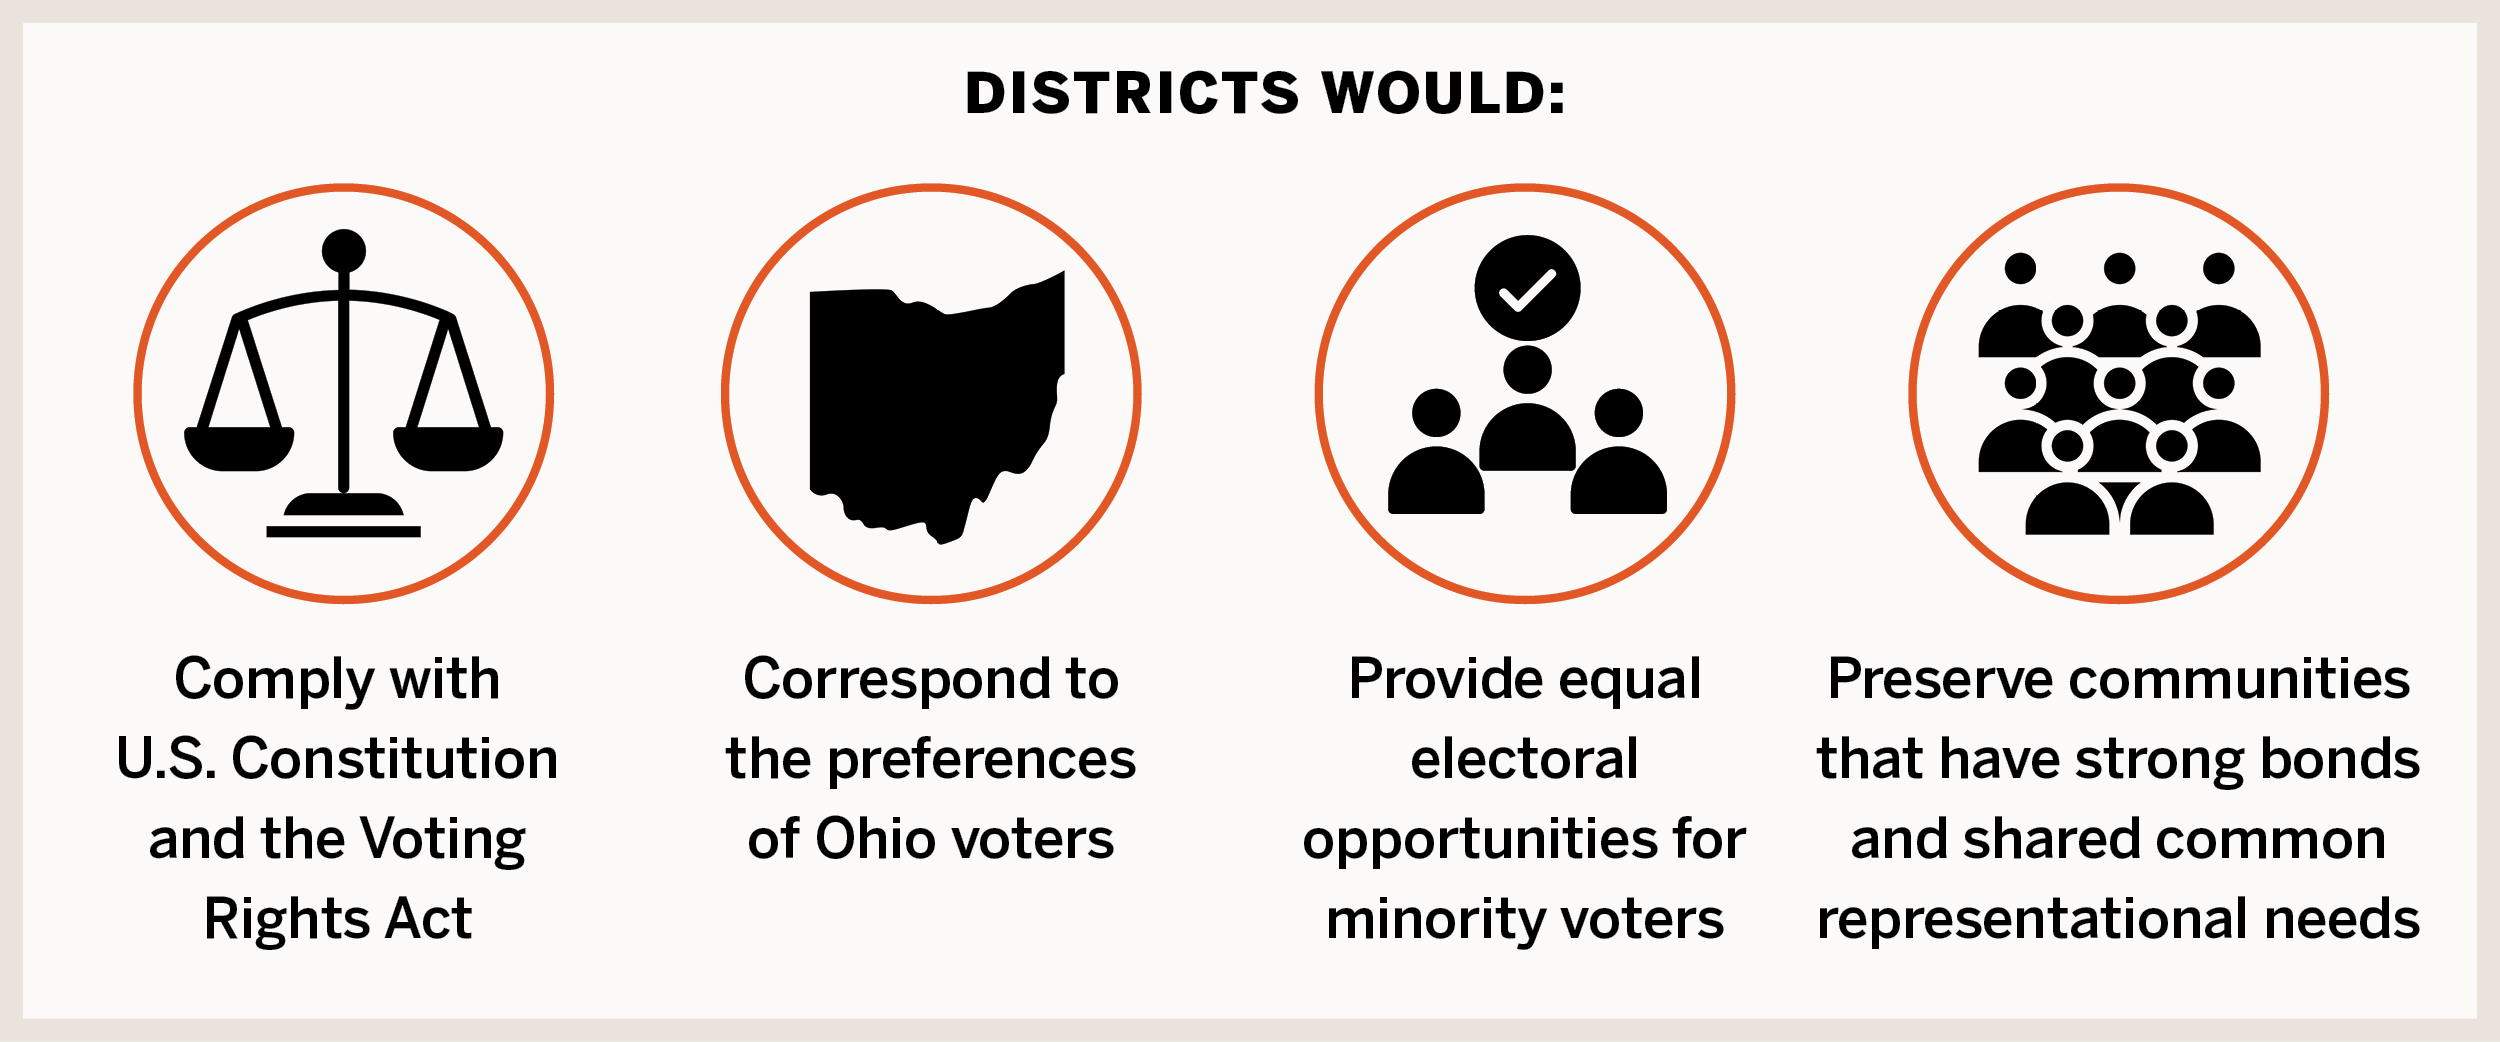 Districts must comply with federal law, correspond to the political preferences of Ohio voters, provide equal electoral opportunities for voters of color, and preserve communities that have strong bonds and share common representational needs